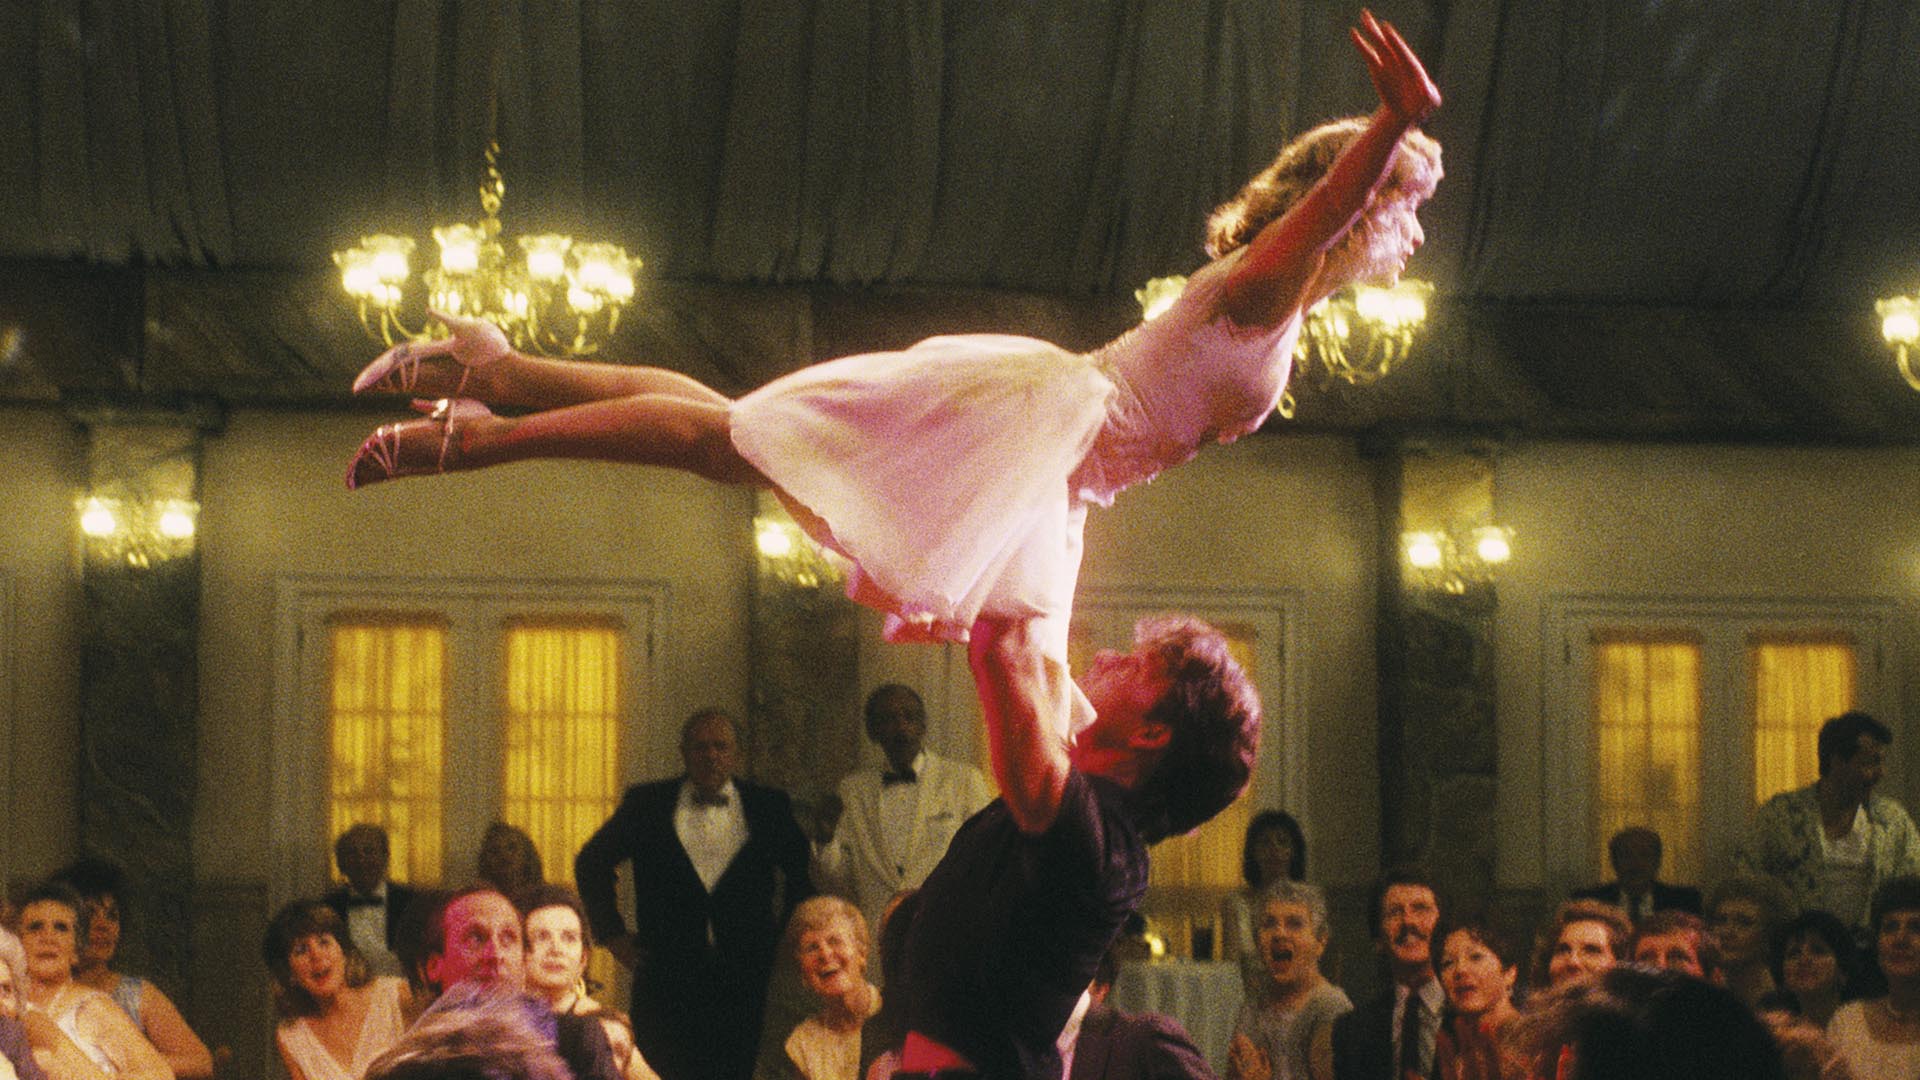 Dirty Dancing' Sequel With Jennifer Grey Confirmed By Lionsgate – Deadline